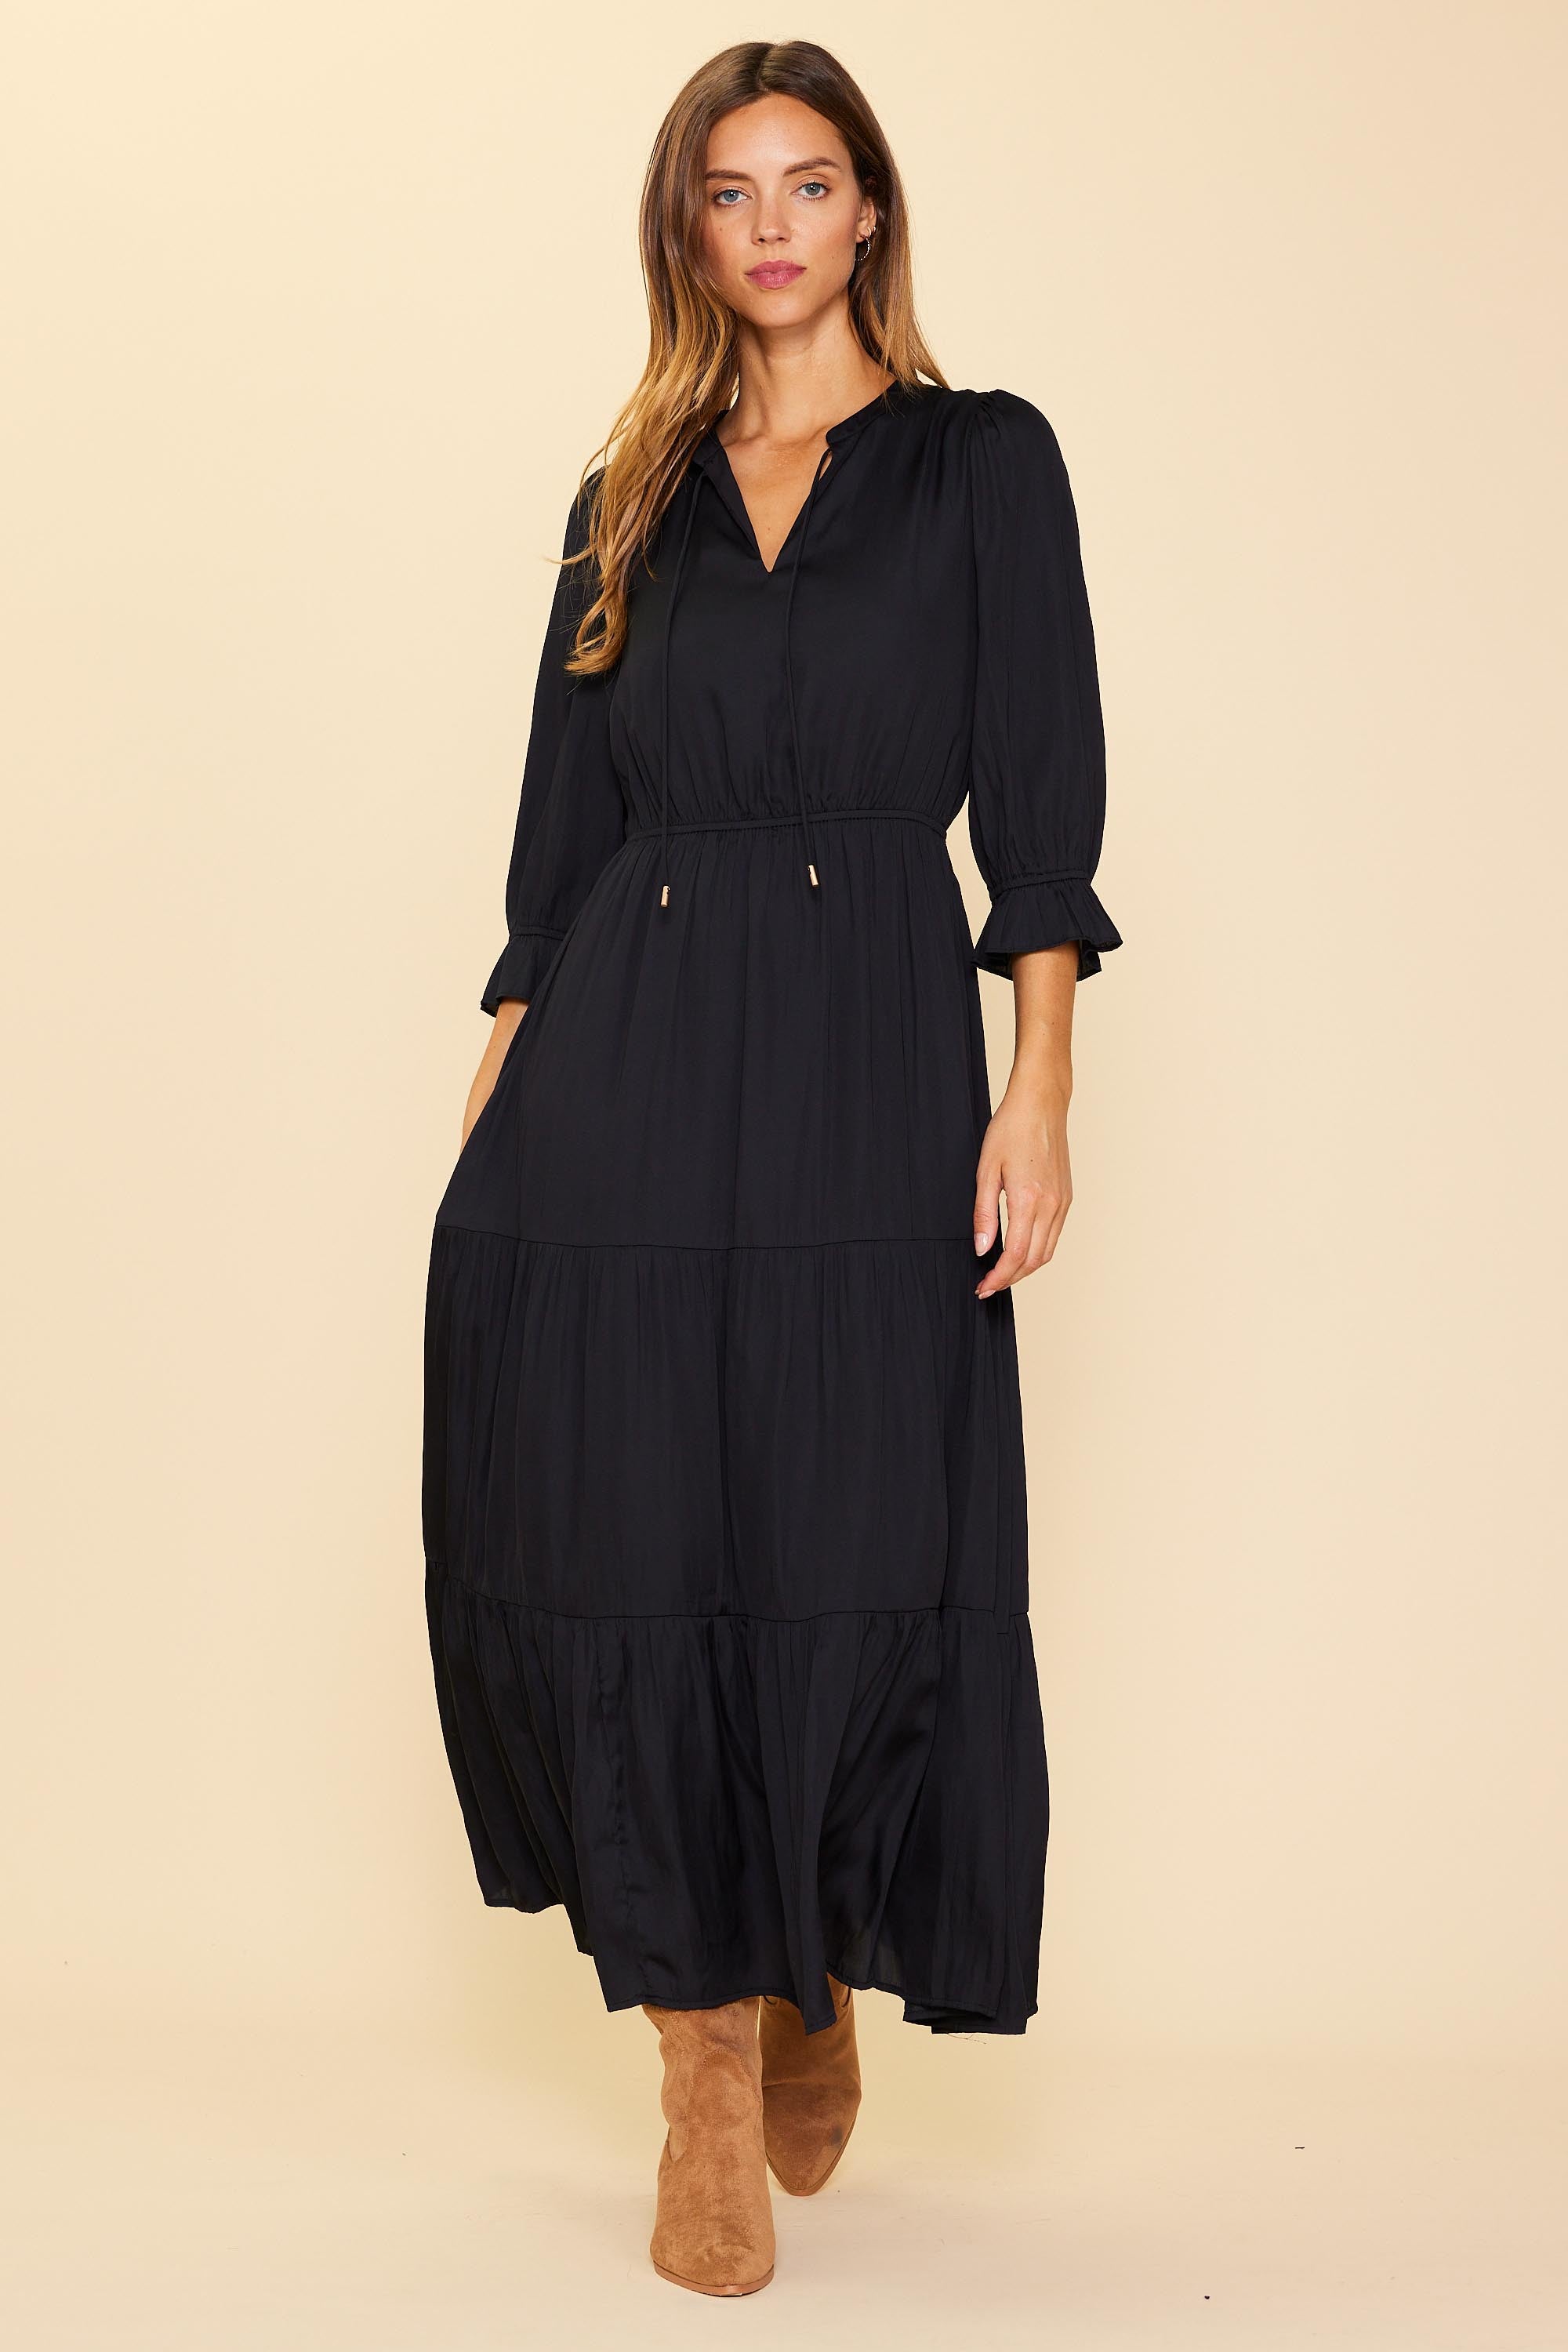 Fall For Me Maxi Dress -Black, long sleeve, tie v-neck, tiered, maxi, plus